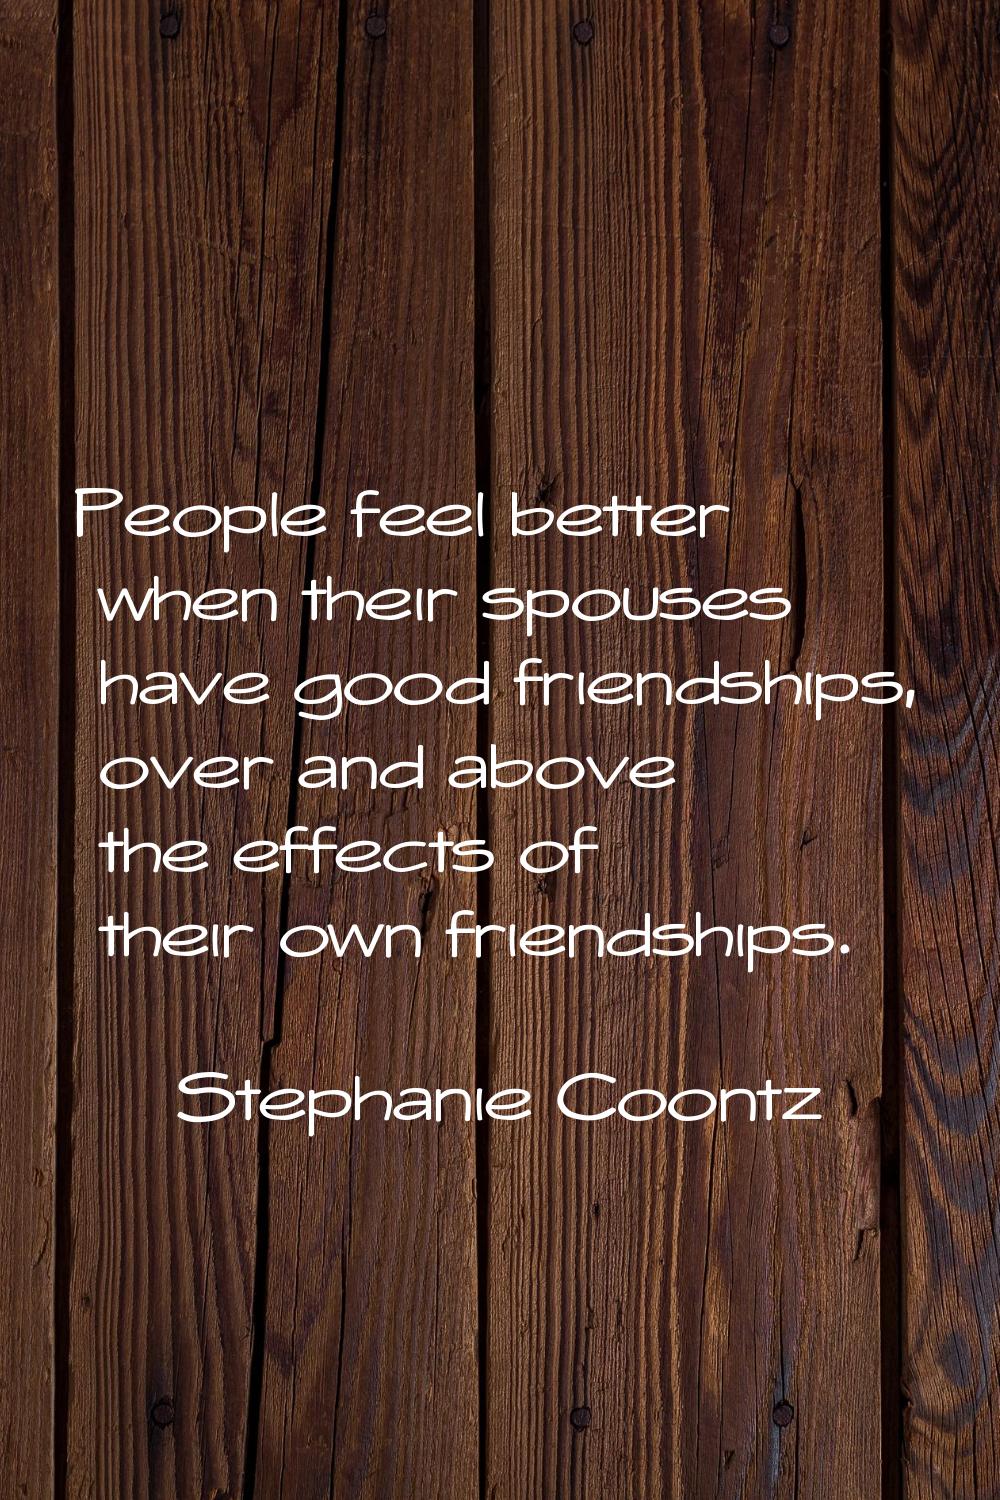 People feel better when their spouses have good friendships, over and above the effects of their ow